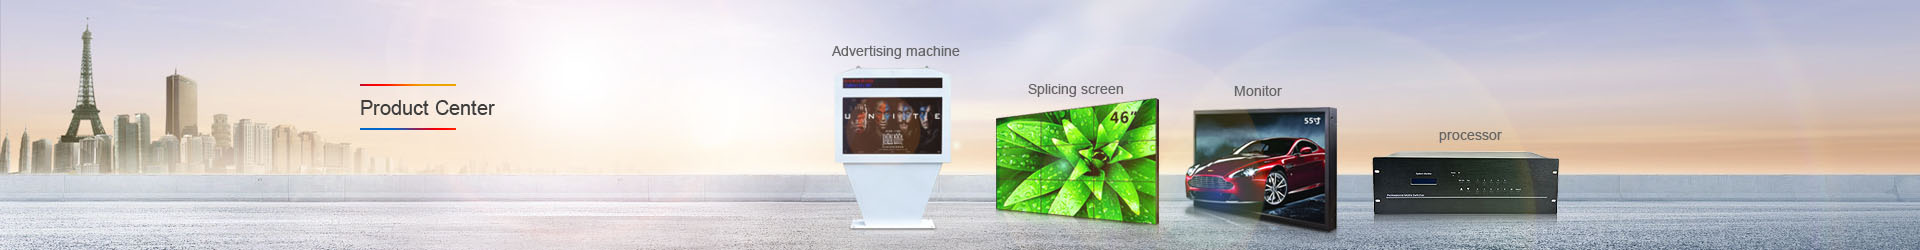 65 inch all-in-one teaching and meeting machine